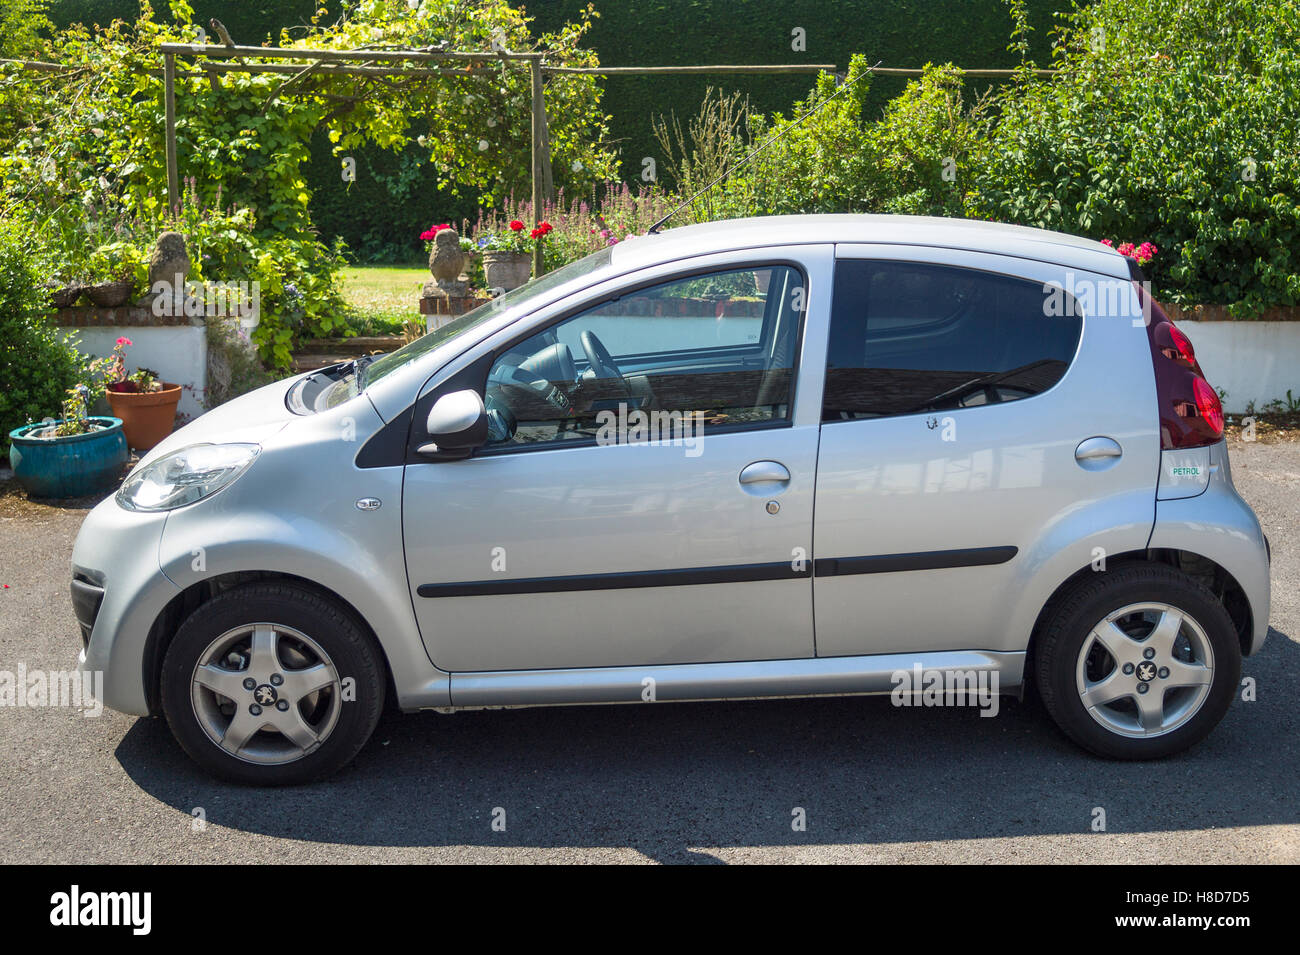 A small Peugeot 107 saloon car showing its side view Stock Photo